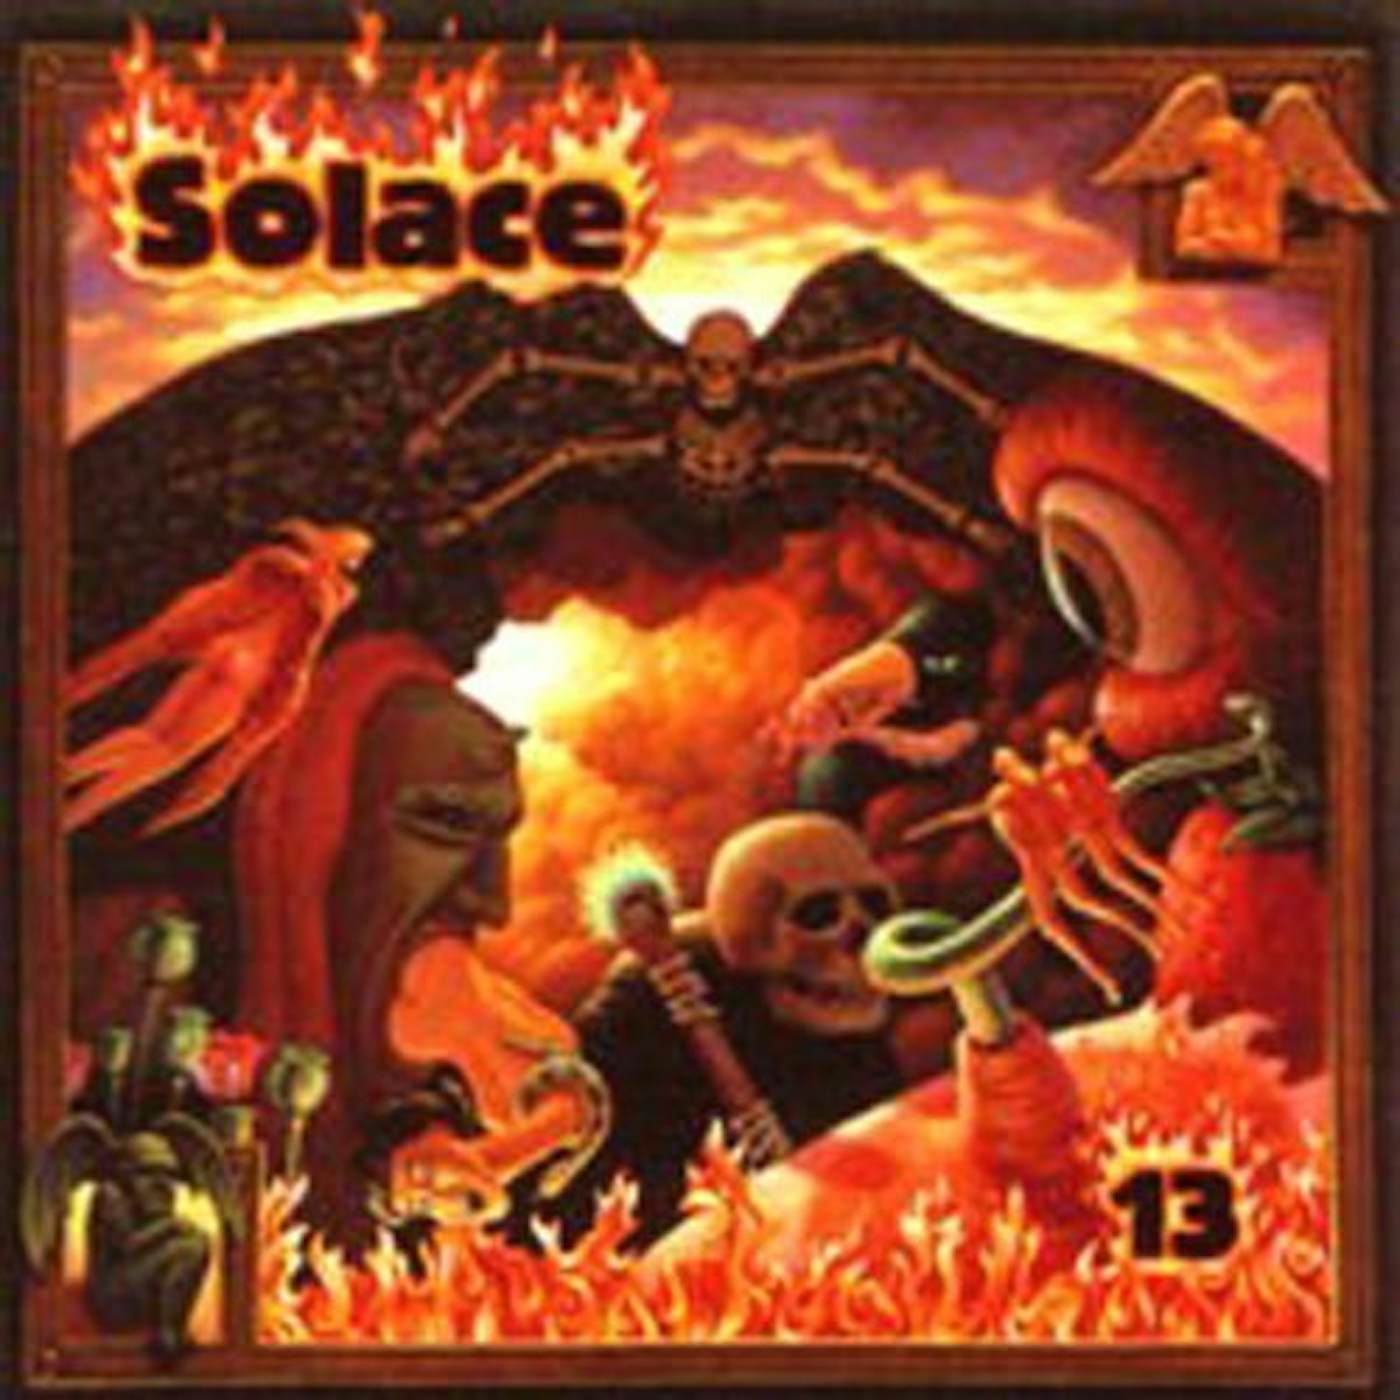 Solace 13 CD